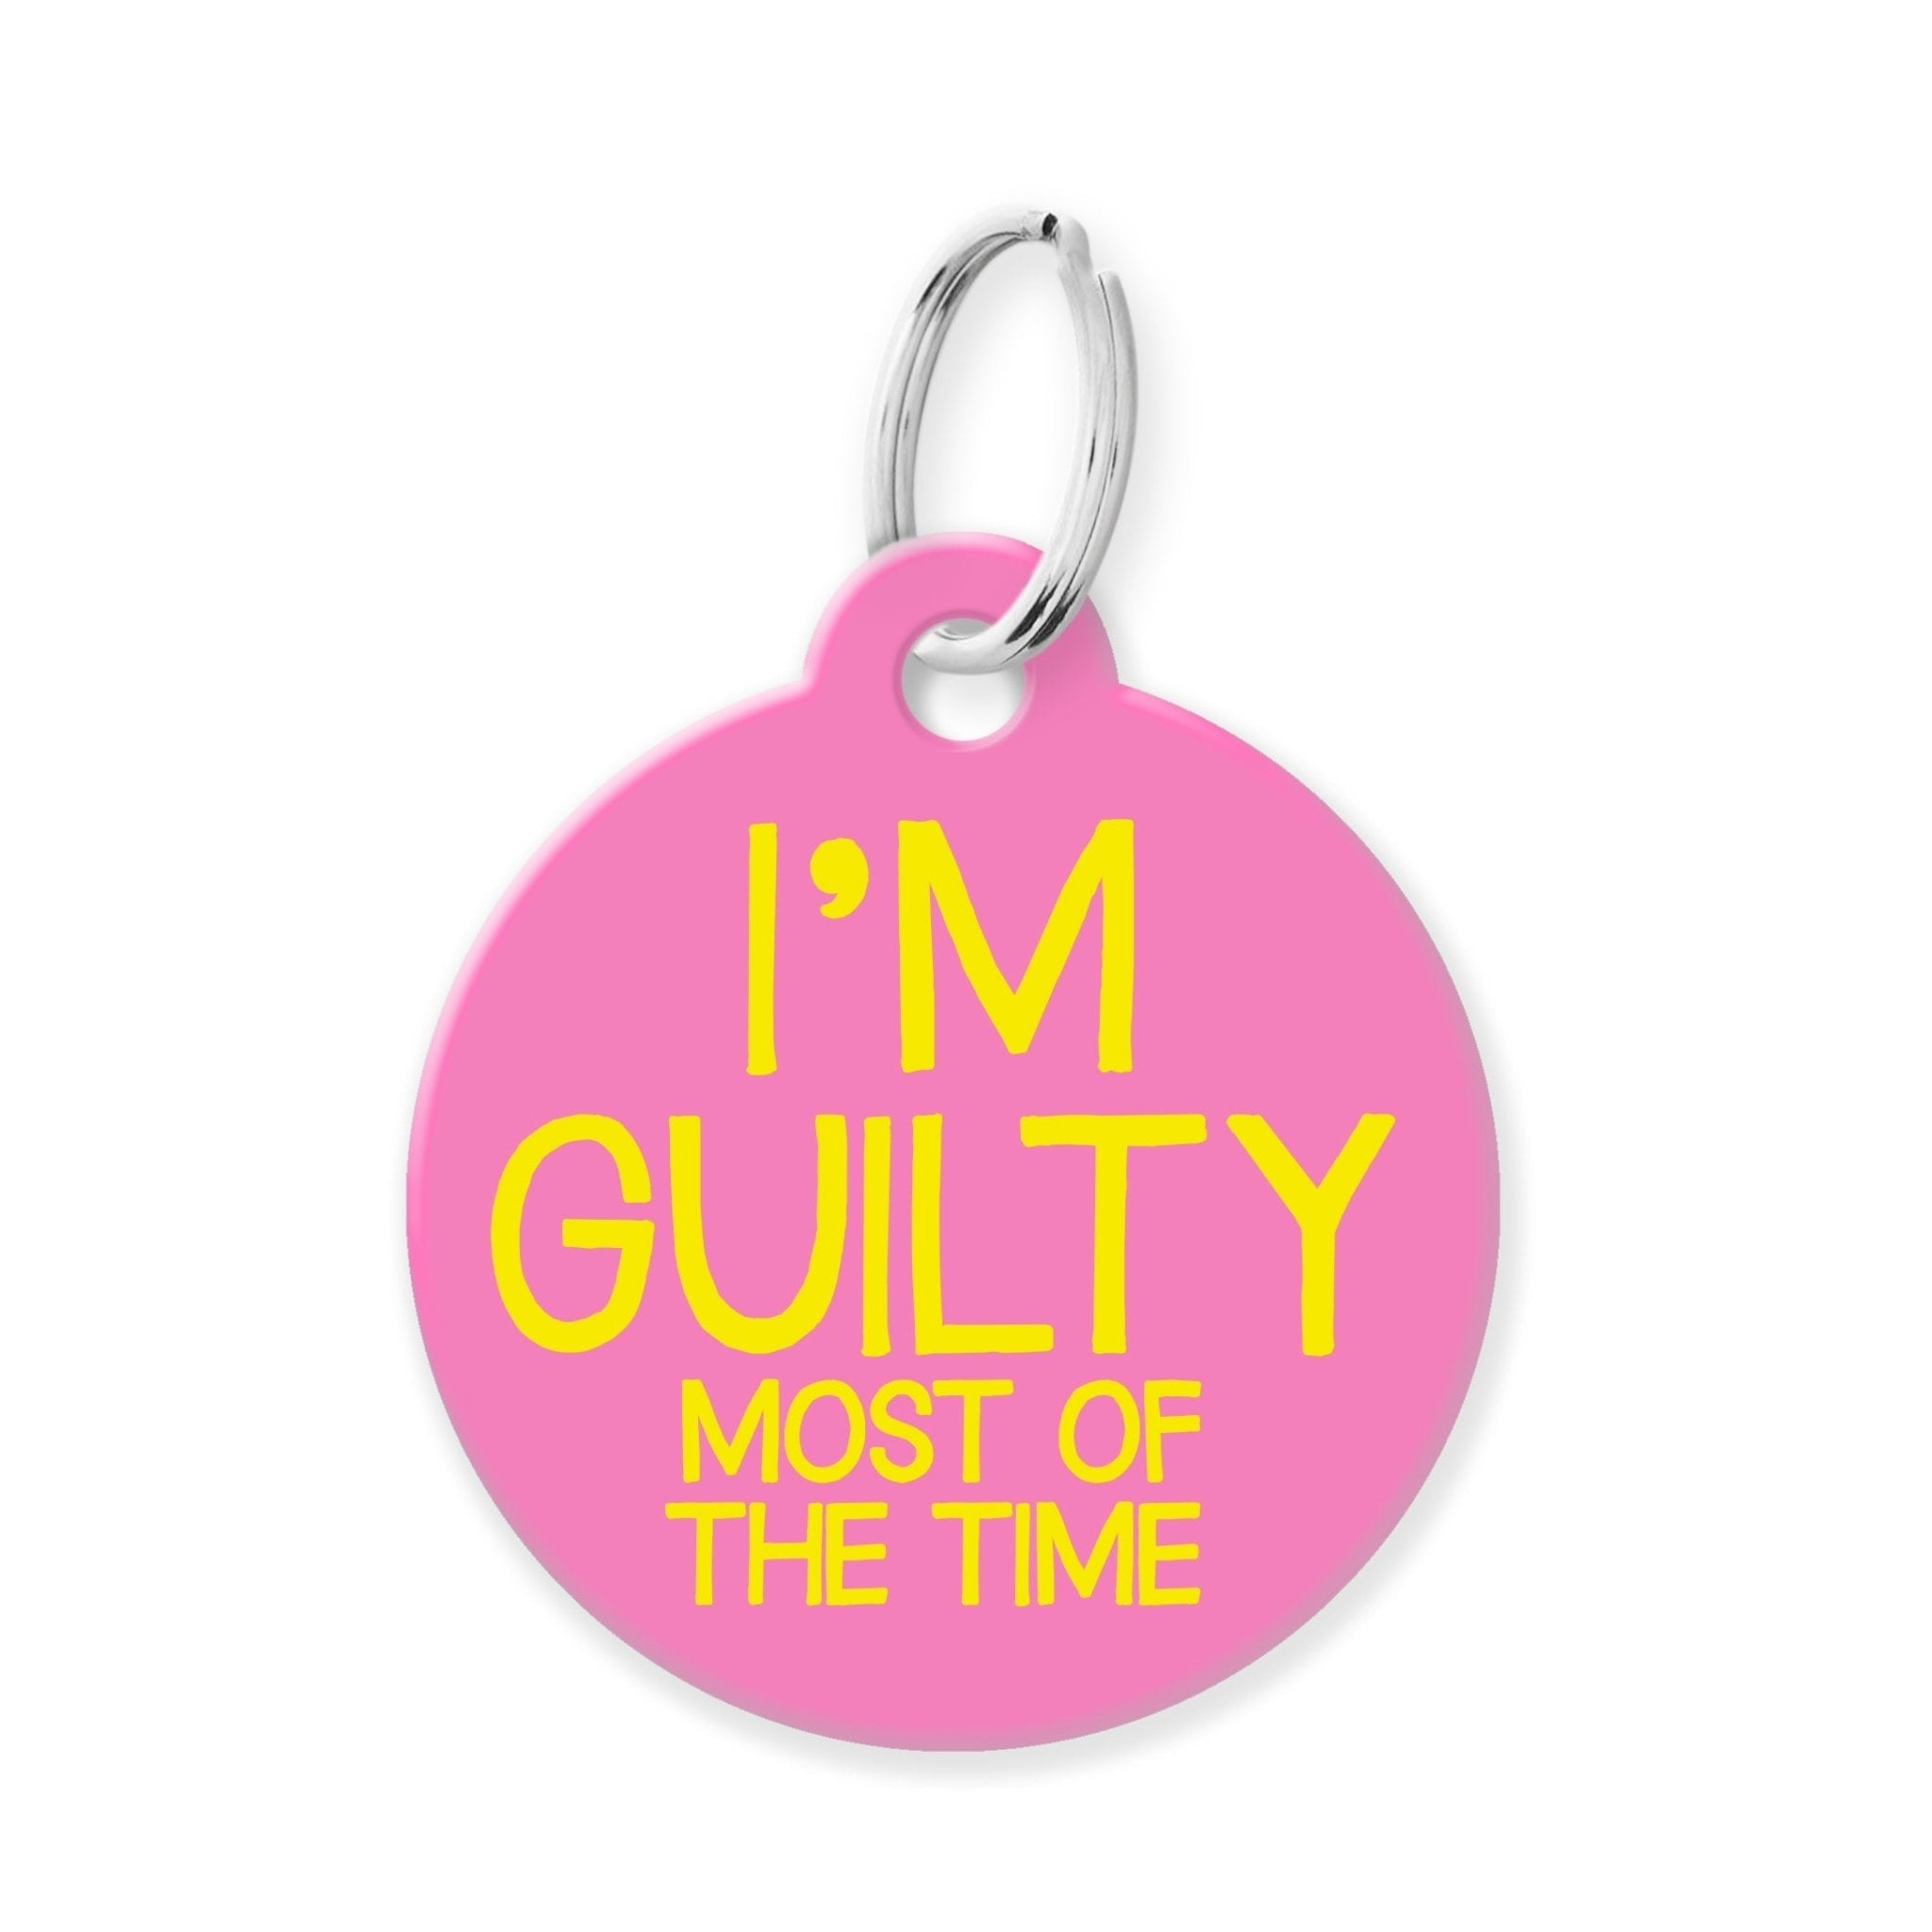 I'm Guilty Most of the Time Funny Pet Tag - The Barking Mutt